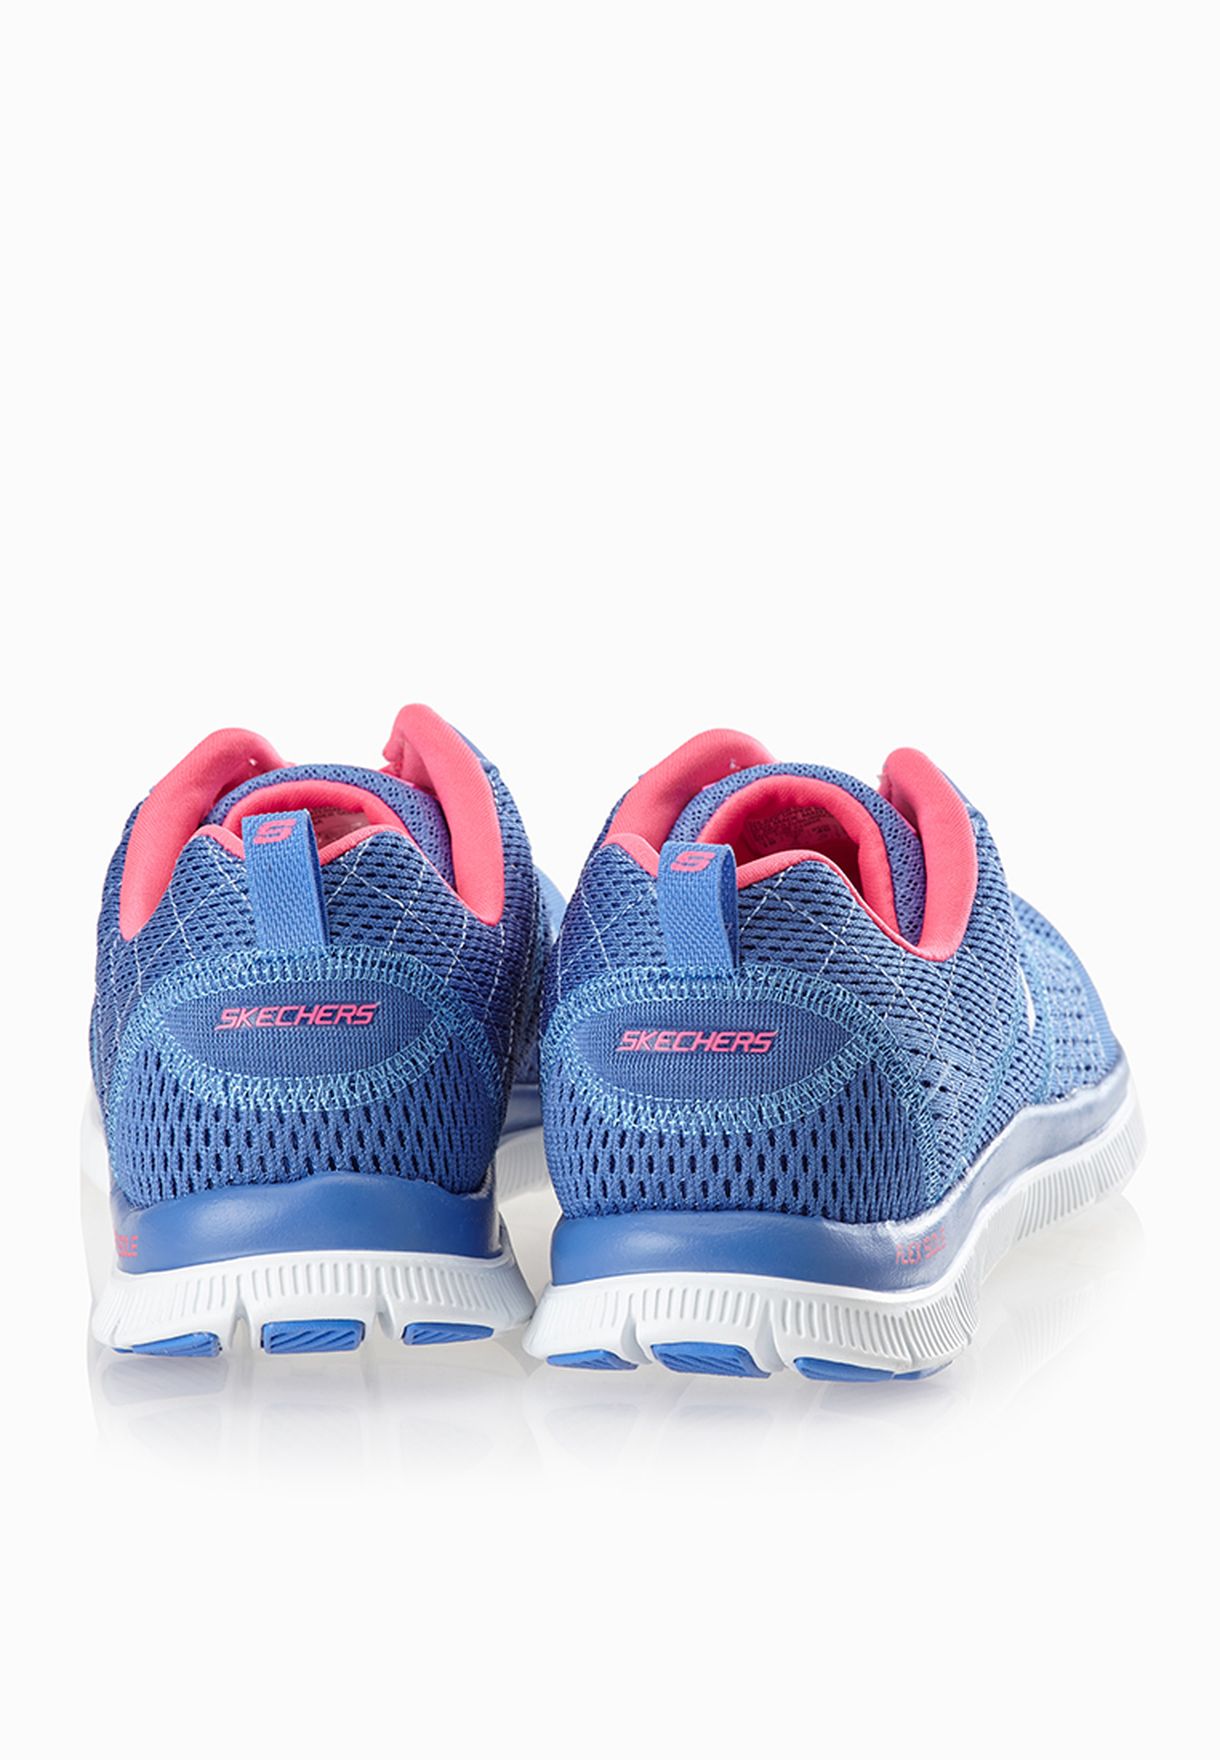 skechers flex appeal obvious choice trainers